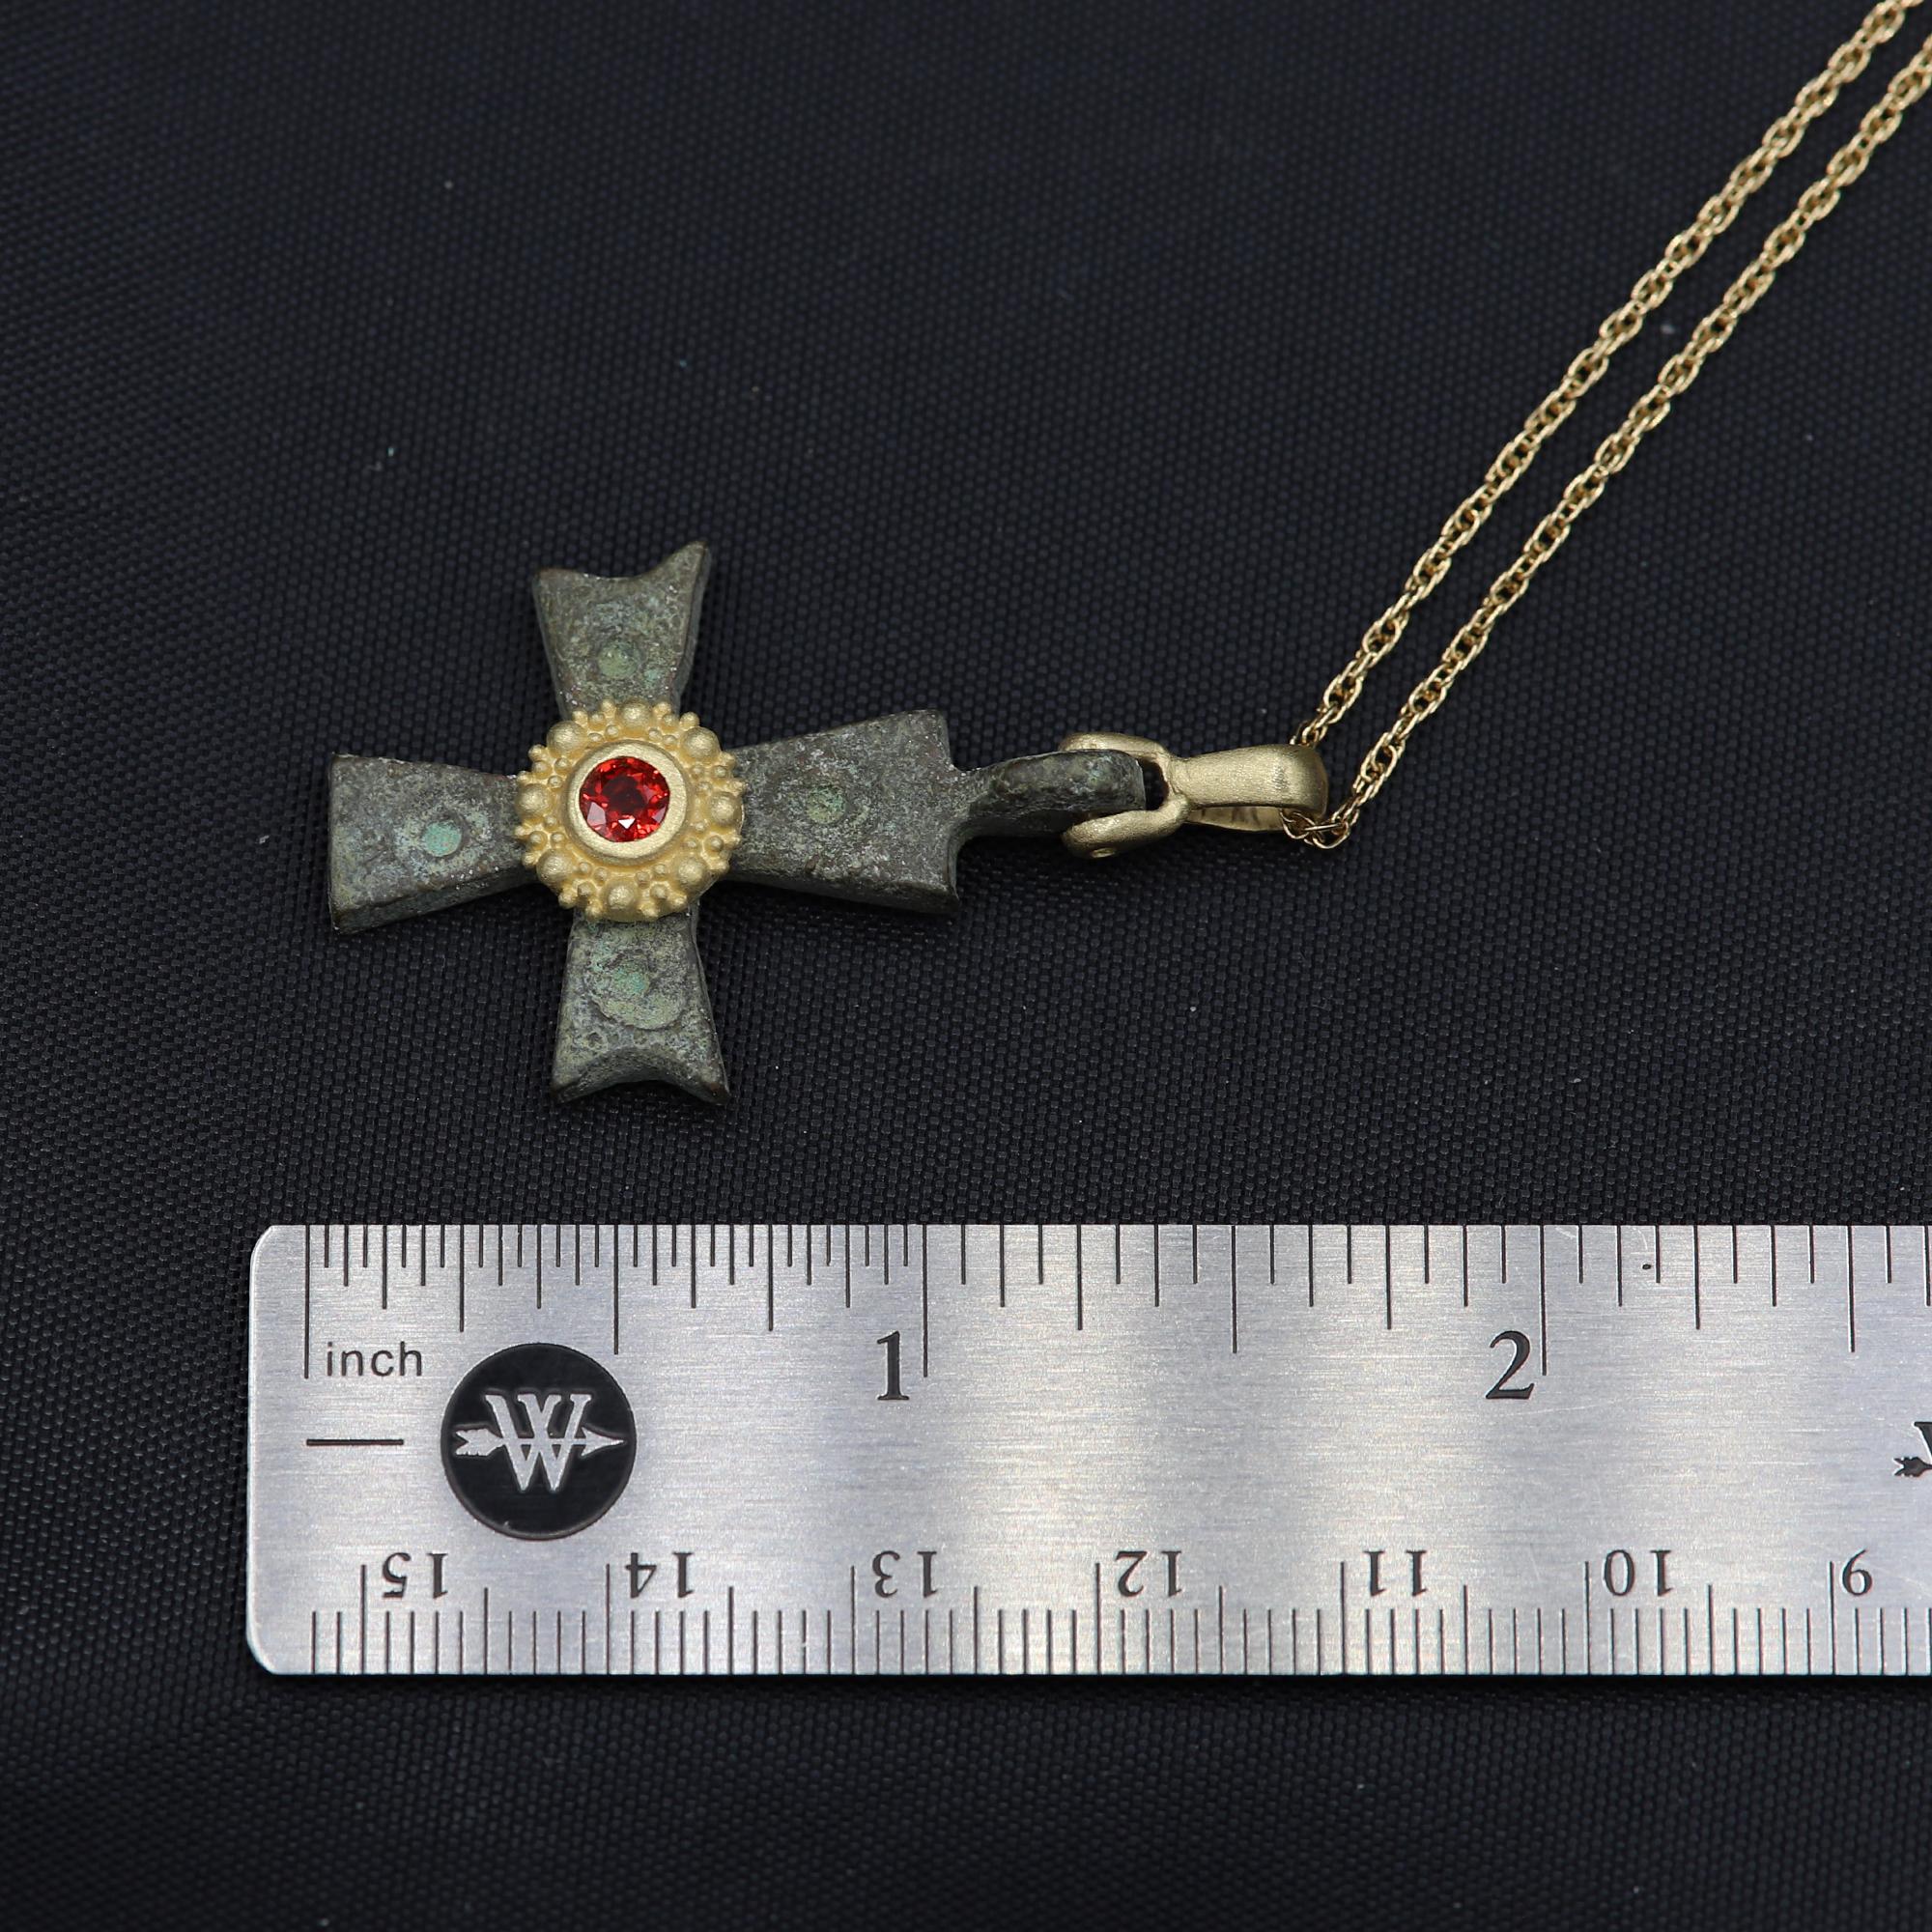 Magnificent piece of History - can be yours today !
Ancient Byzantine Period cross.
Hand set in Italy with 18k Yellow Gold & Red Sapphire.
Approx size 1' inch / 25 mm.
This Antique Bronze Cross is estimated from 600-900 AD 
Chain Not Included  
Rich